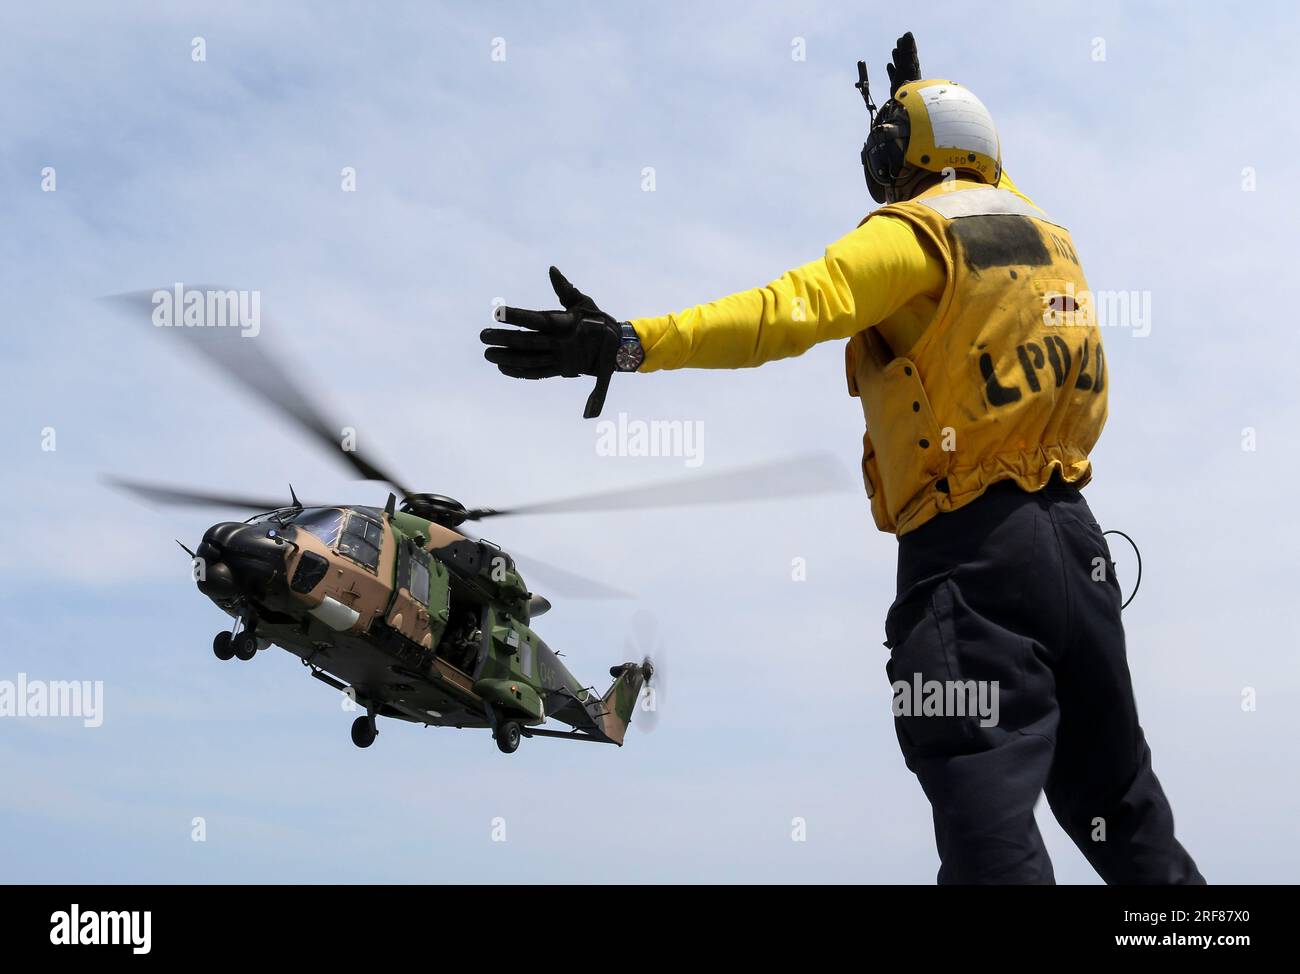 Coral Sea, Australia. 19 November, 2018. U.S Navy sailor Caleb Brawner, signals a Royal Australian Navy MRH-90 Taipan helicopter, for take off from the flight deck of the San Antonio-class amphibious transport dock USS Green Bay during cross deck flight operations, November 19, 2018 on the Coral Sea.  Credit: MC2 Anaid Banuelos Rodriguez/US Navy Photo/Alamy Live News Stock Photo